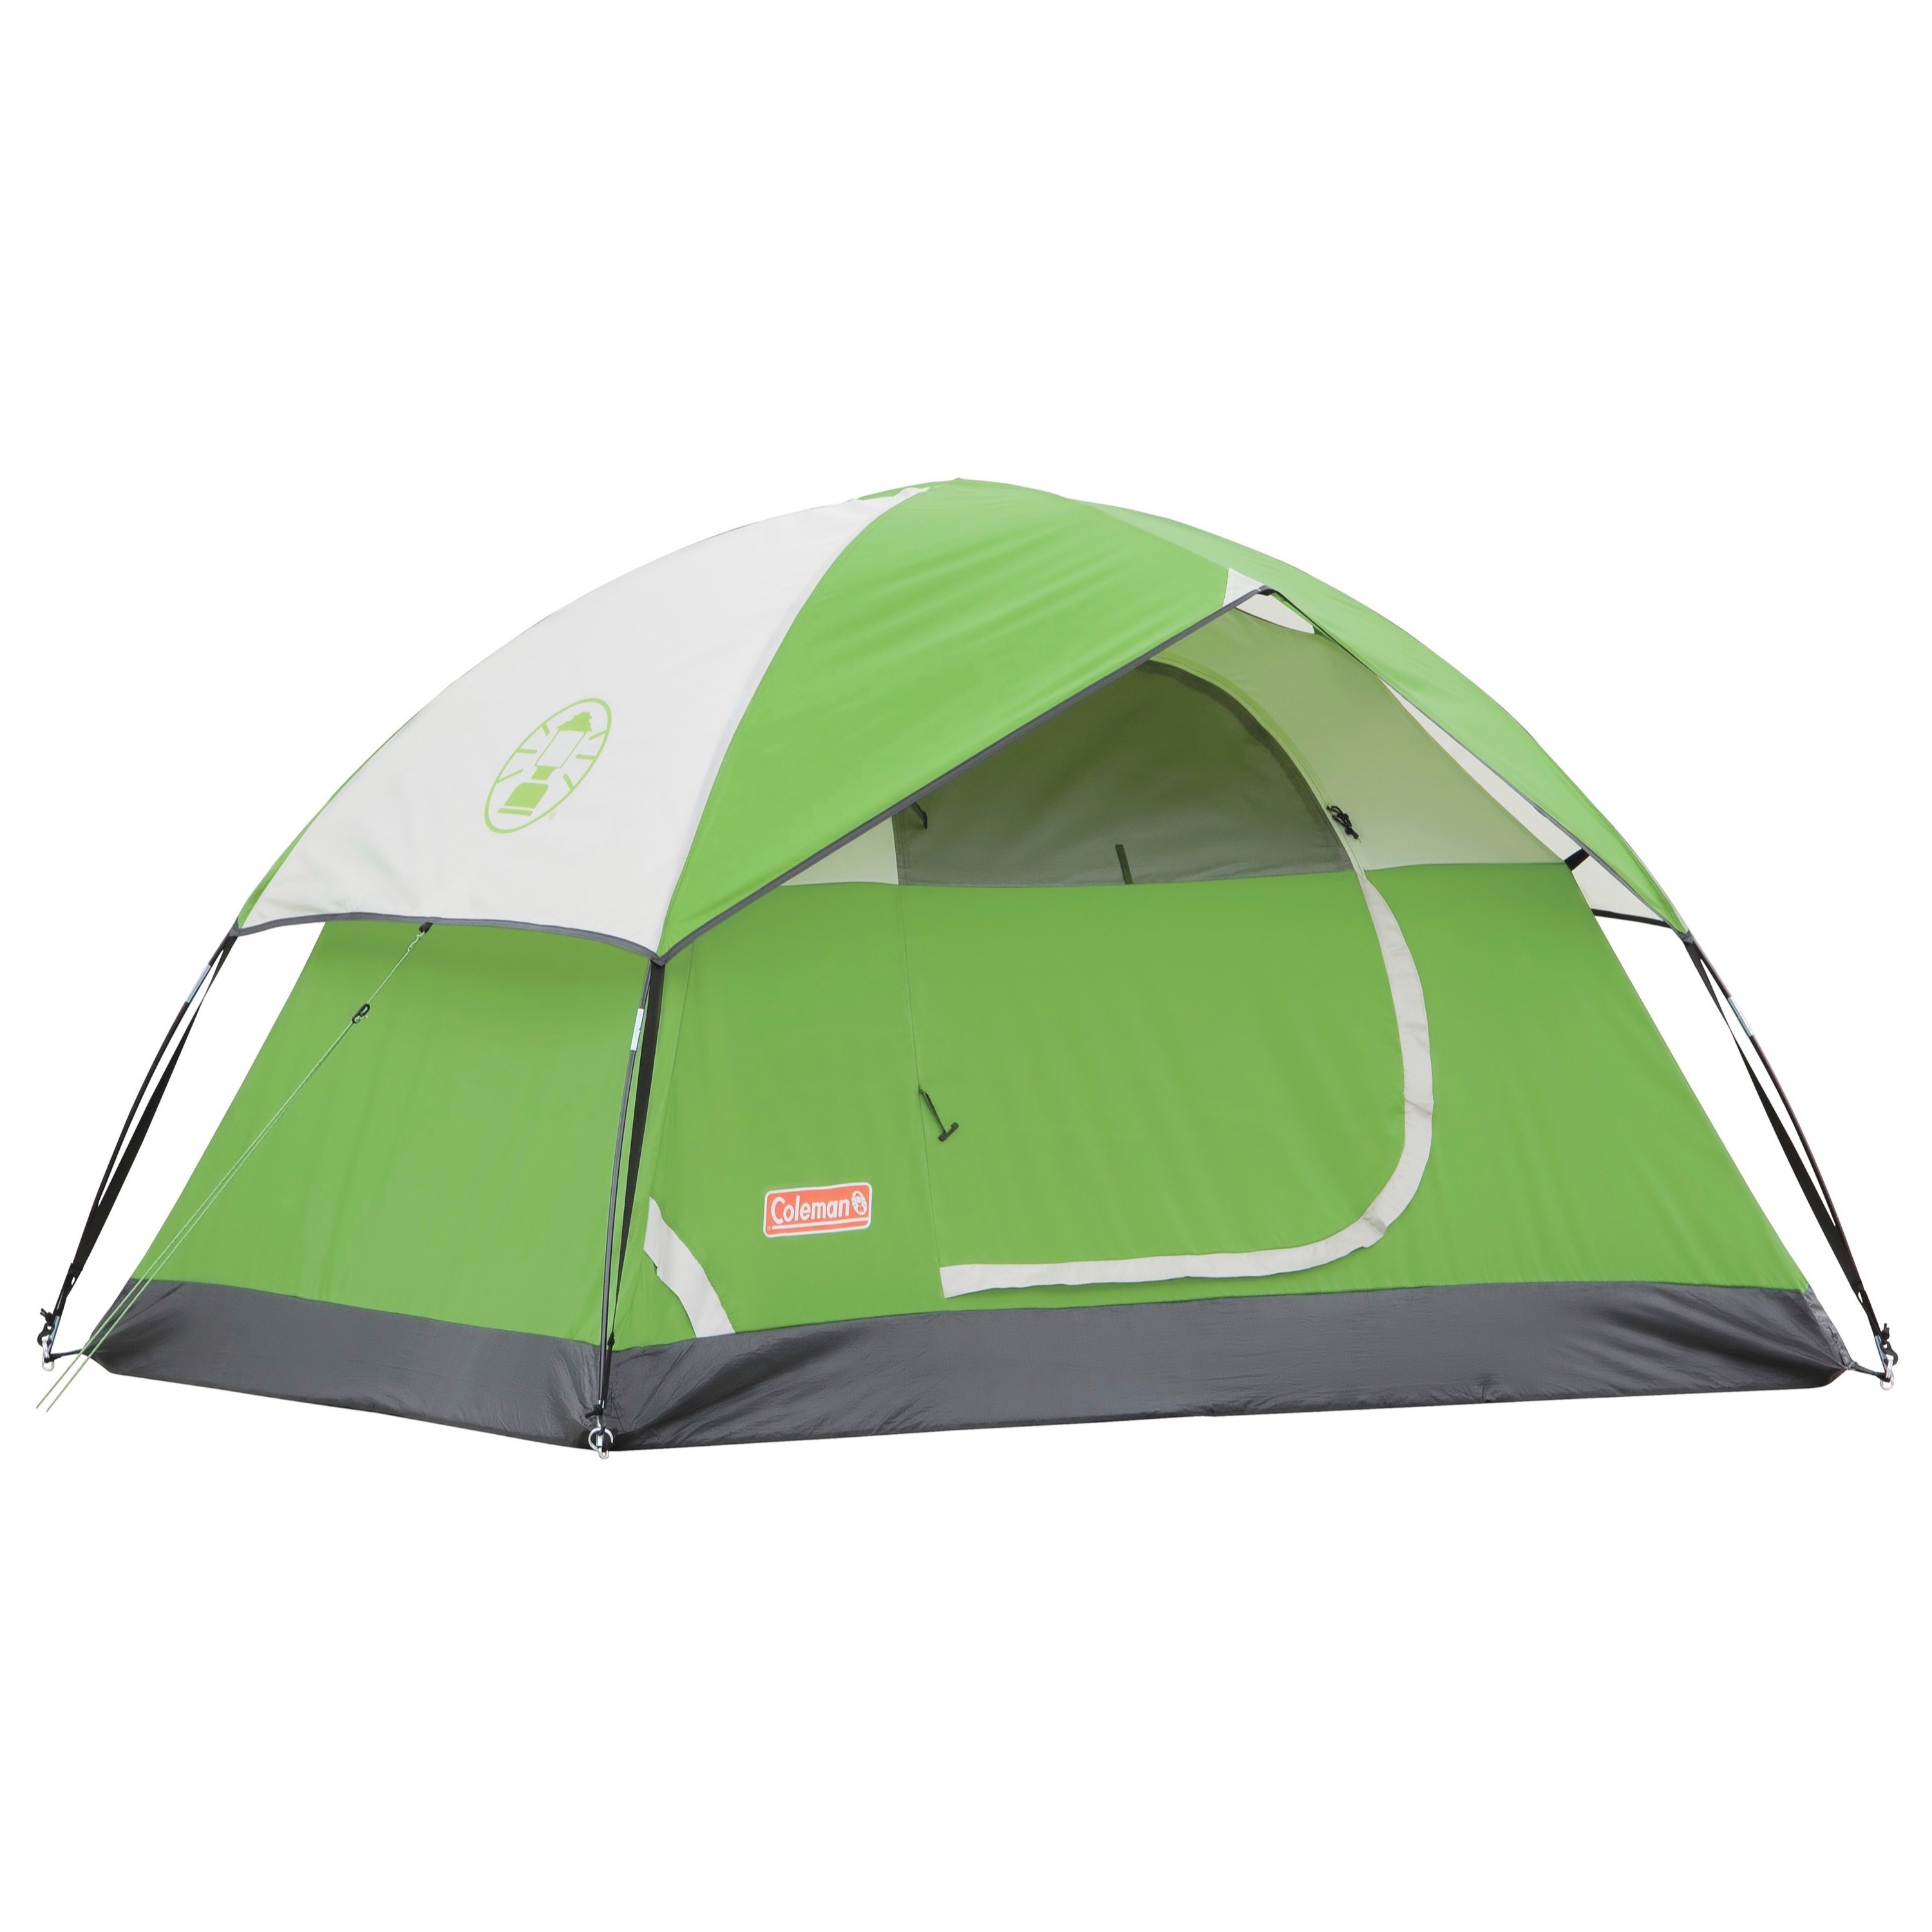 Coleman Sundome 2-Person Weatherproof Dome Tent with E-Port, 1 Room, Green - image 1 of 9